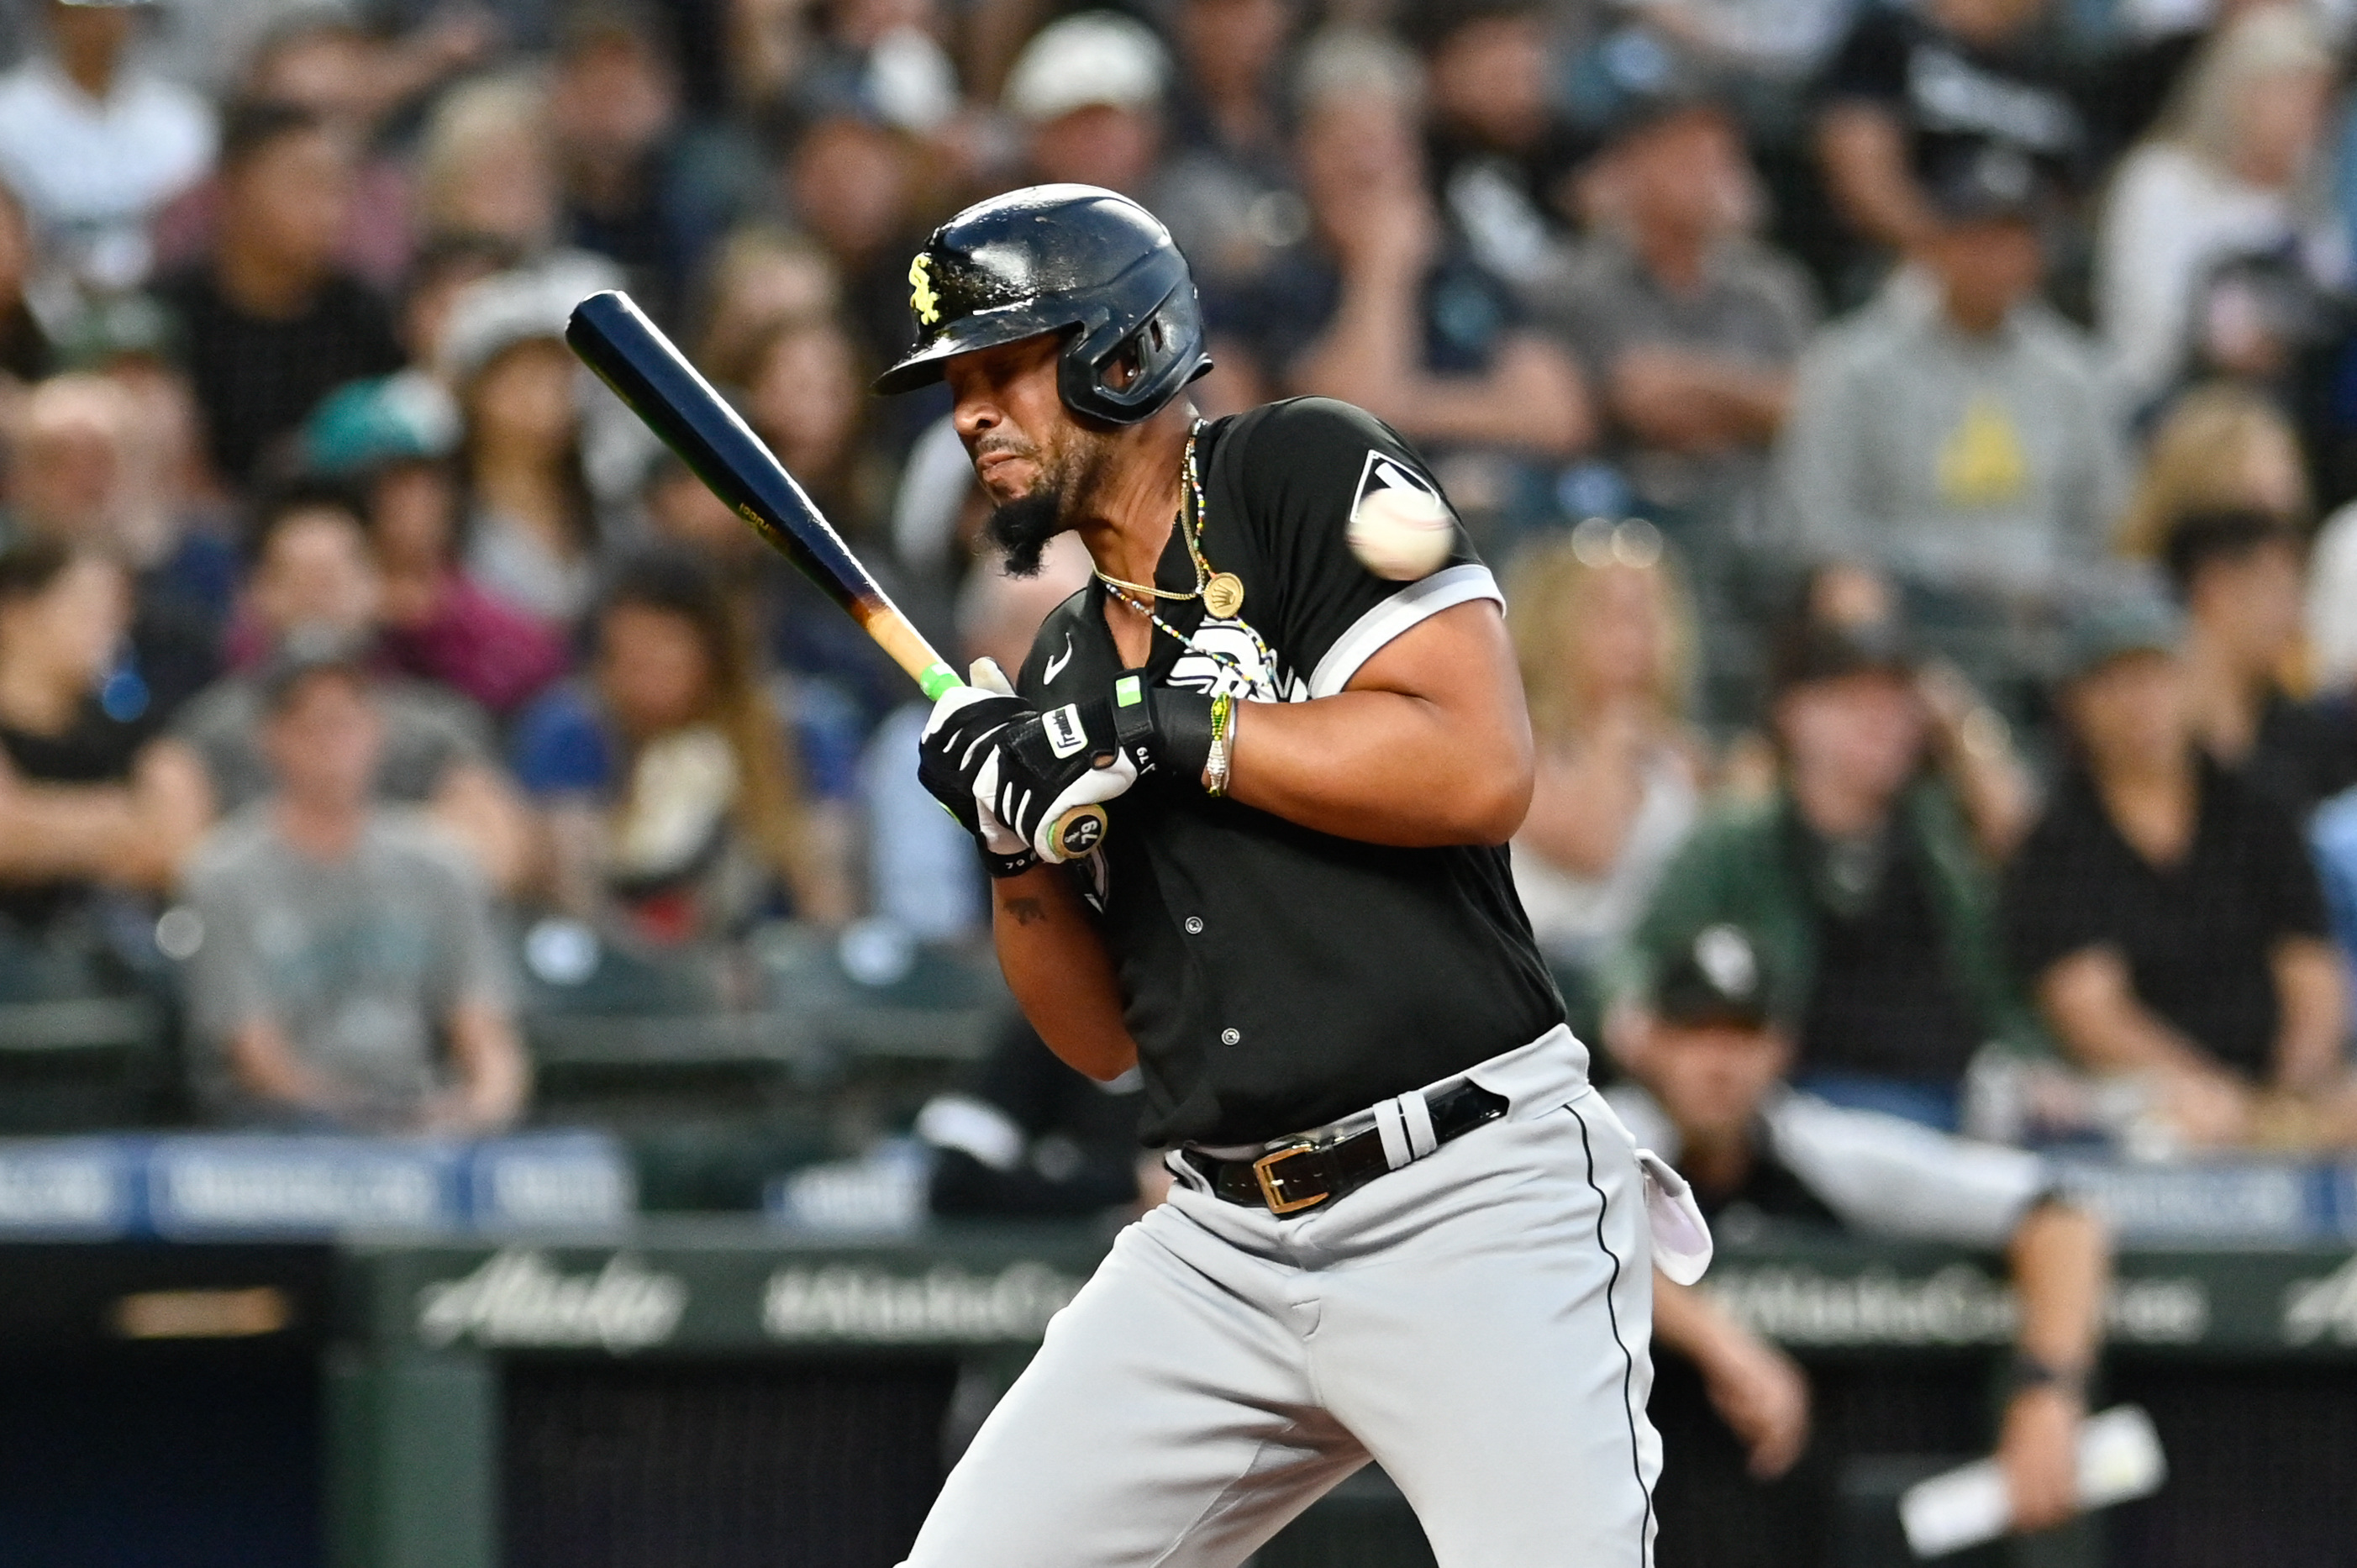 Sep 6, 2022; Seattle, Washington, USA; Chicago White Sox first baseman Jose Abreu (79) is hit by a pitch thrown by Seattle Mariners starting pitcher Logan Gilbert (not pictured) during the fourth inning at T-Mobile Park. Mandatory Credit: Steven Bisig-USA TODAY Sports